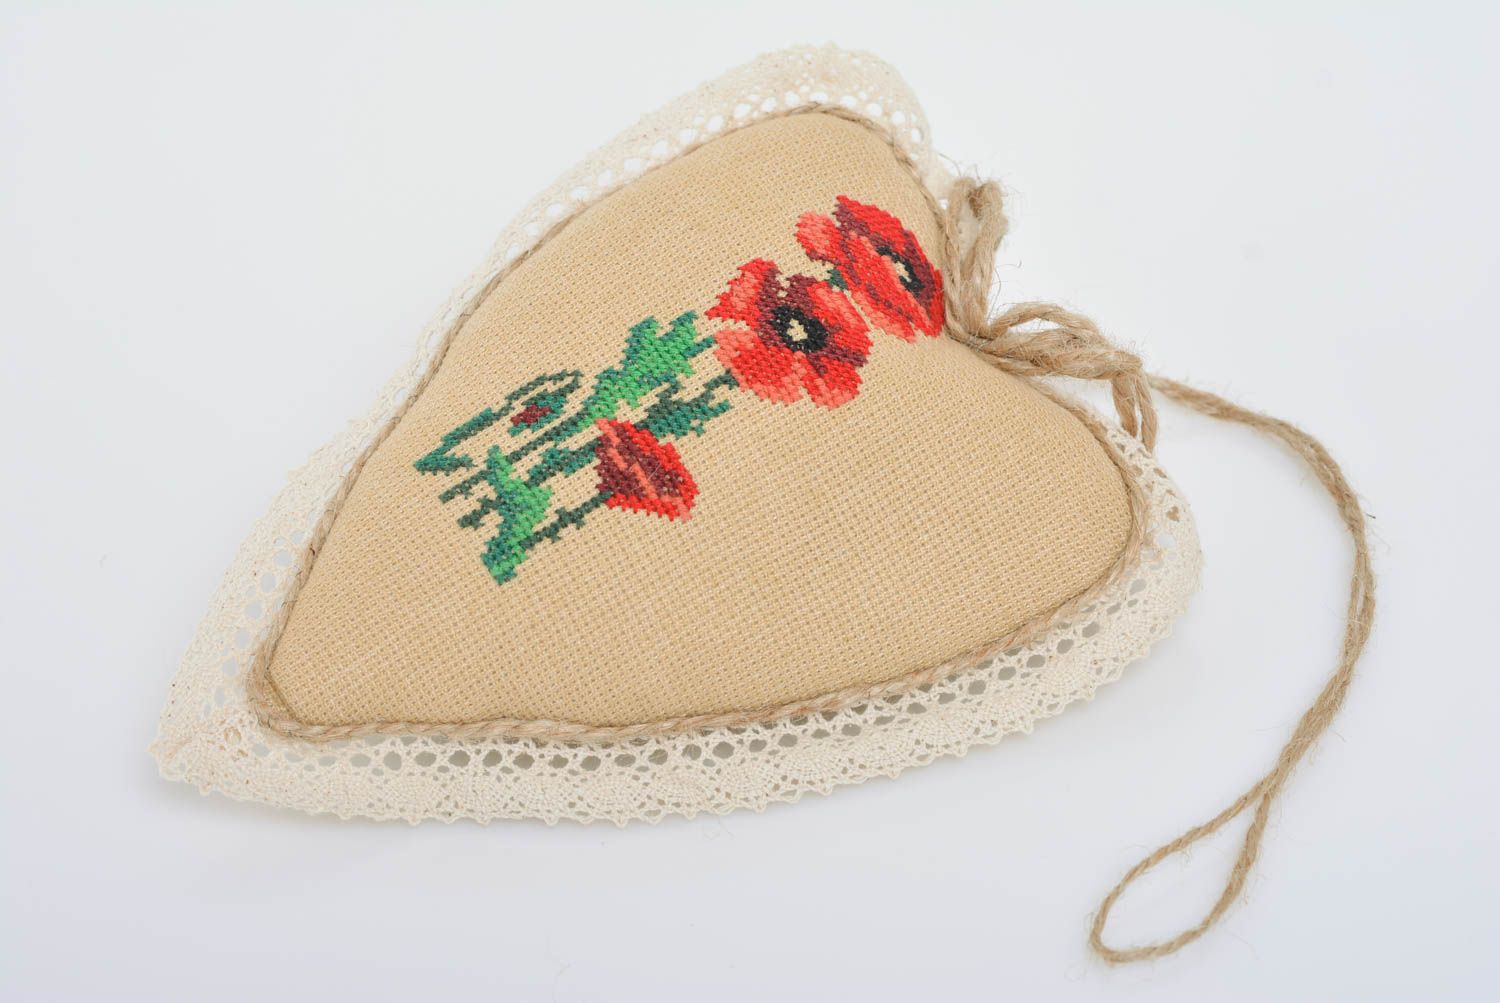 Handmade interior decorative heart-shaped wall hanging with embroidered poppies photo 1